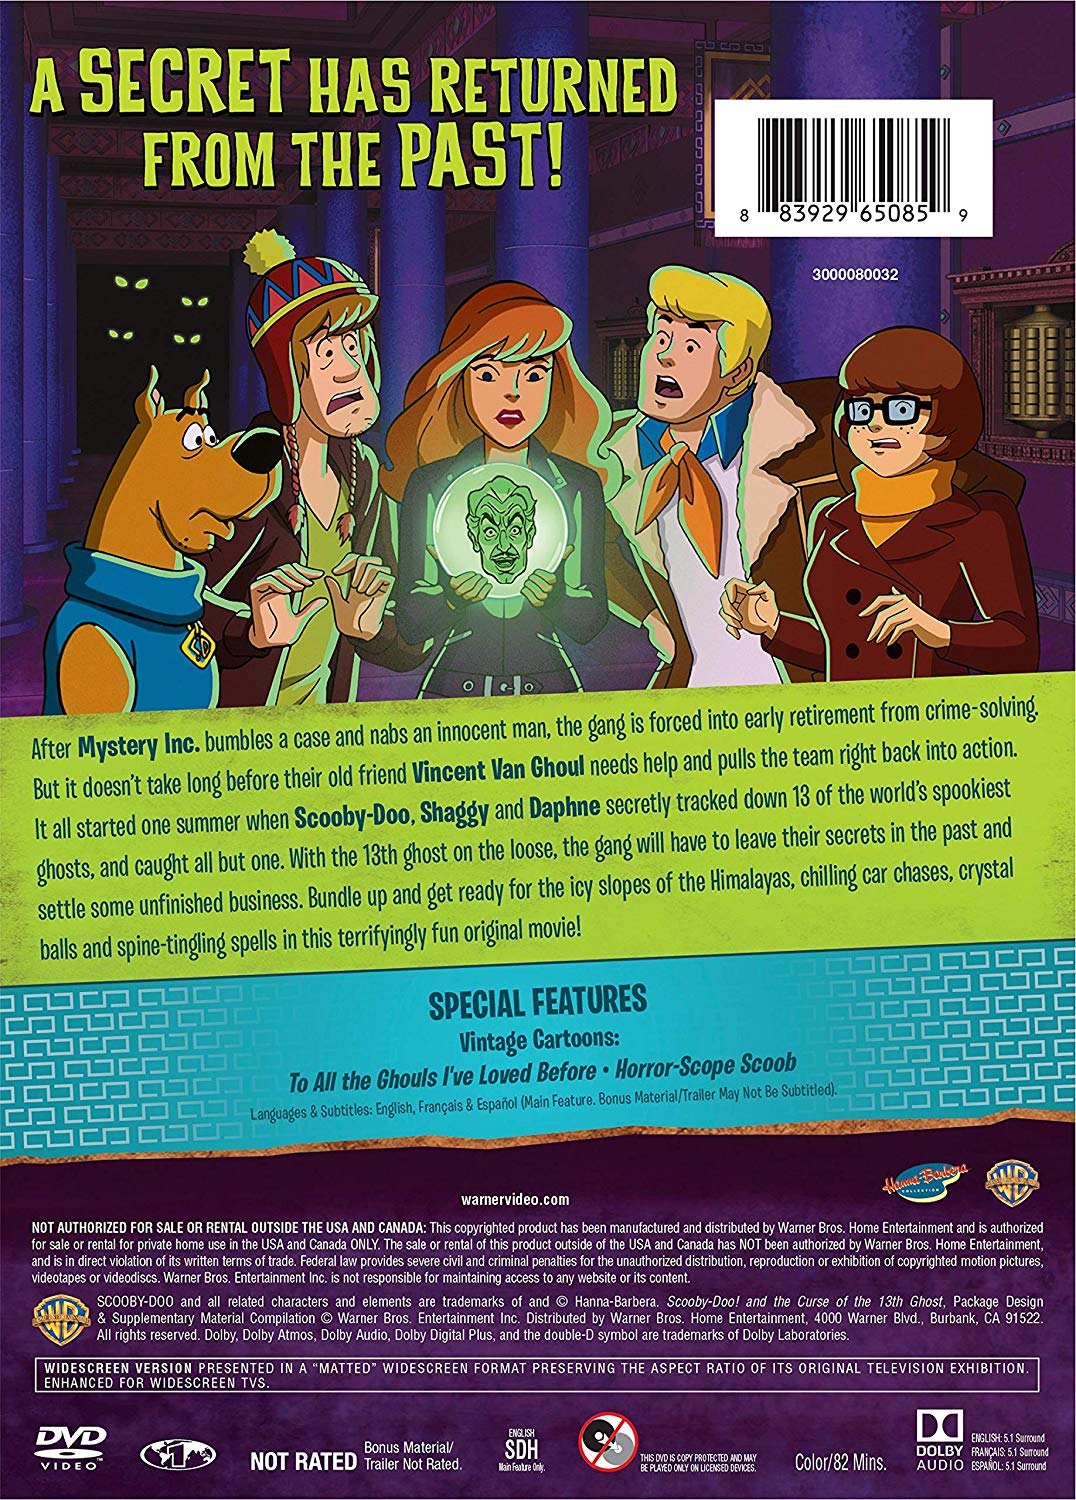 scooby-doo-and-the-curse-of-the-13th-ghost-home-media-scoobypedia-fandom